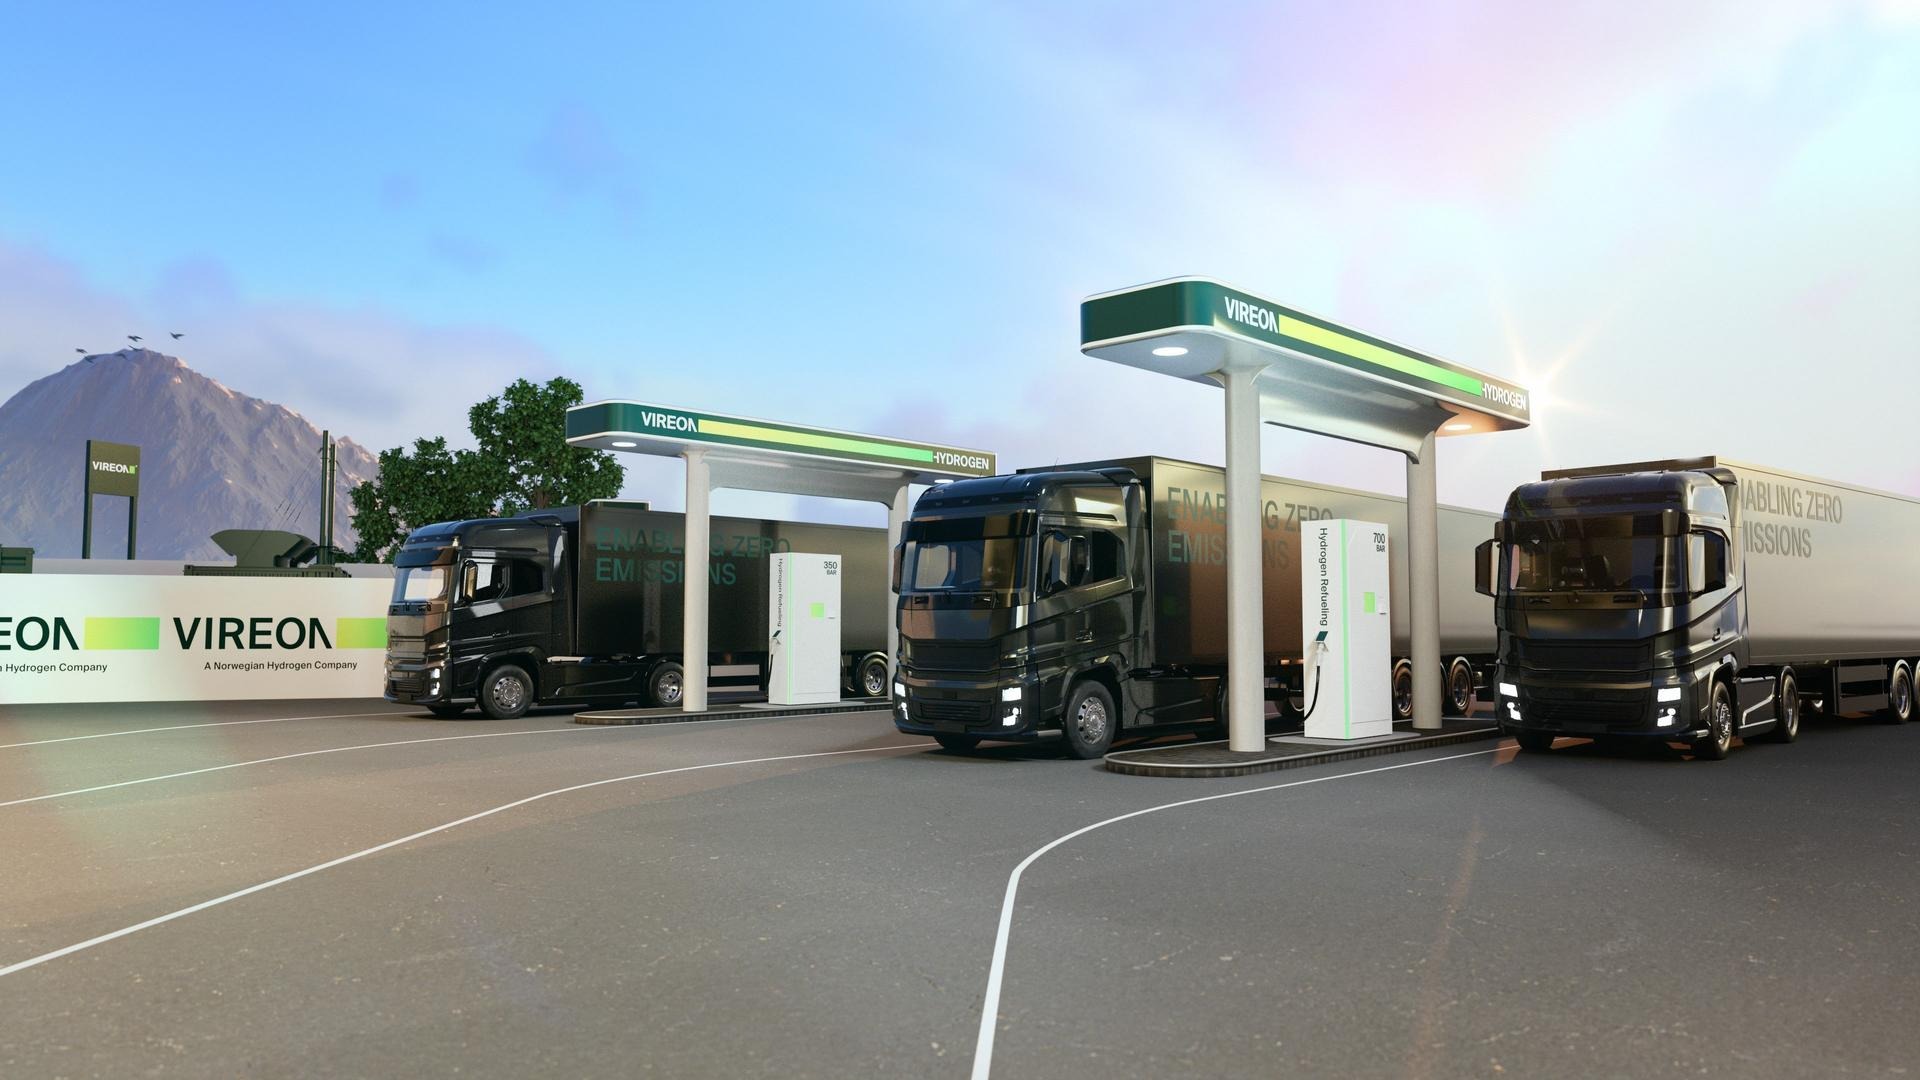 Vireon, a subsidiary of Norwegian Hydrogen and a leading hydrogen refueling company in the Nordics, has been awarded a €9.2 million grant by the European Union. This funding is set to revolutionize the green hydrogen infrastructure by constructing production and refueling stations for heavy-duty vehicles across Finland and Denmark, marking a significant advance in Vireon’s effort to decarbonize Europe’s transportation sector. This EU grant, the second for Norwegian Hydrogen following a €9 million award earlier this year for a project in Denmark, totals a substantial investment in the company’s green hydrogen initiatives. Jens Berge, CEO of Norwegian Hydrogen, expressed pride in this dual achievement, emphasizing its impact on strengthening their leadership in the green energy transition. The project plans include a 5 MW electrolyzer and an extensive network of green hydrogen refueling stations extending from Northern Finland through Sweden and Denmark into continental Europe. This network will support the zero-emission transportation corridor for heavy-duty vehicles. The funded initiative will facilitate the construction of seven stations across the two countries, enhancing access for both passenger and commercial vehicles. In Finland, the stations will be strategically placed in Tornio, Liminka, Jyväskylä, and the greater Helsinki area. In Denmark, stations will arise in northern Jutland, Vejle, and Padborg. Per Øyvind Voie, Managing Director of Vireon, highlighted the readiness to build these stations in anticipation of hydrogen trucks expected to hit the market by 2025. The project is supported by the Connecting Europe Facility (CEF), which aligns with the European Green Deal’s objectives. CEF’s commitment to fostering sustainable and interconnected trans-European networks is pivotal to Europe’s broader decarbonization goals, aiming for a sustainable future by 2030 and 2050. Established in 2023, Vireon is at the forefront of the hydrogen refueling industry in the Nordics, focusing on heavy-duty transport. With a strong presence in Norway, Sweden, Denmark, and Finland, and backed by significant EU funding, Vireon is poised to play a crucial role in enabling zero-emission solutions for the region’s transport sector.